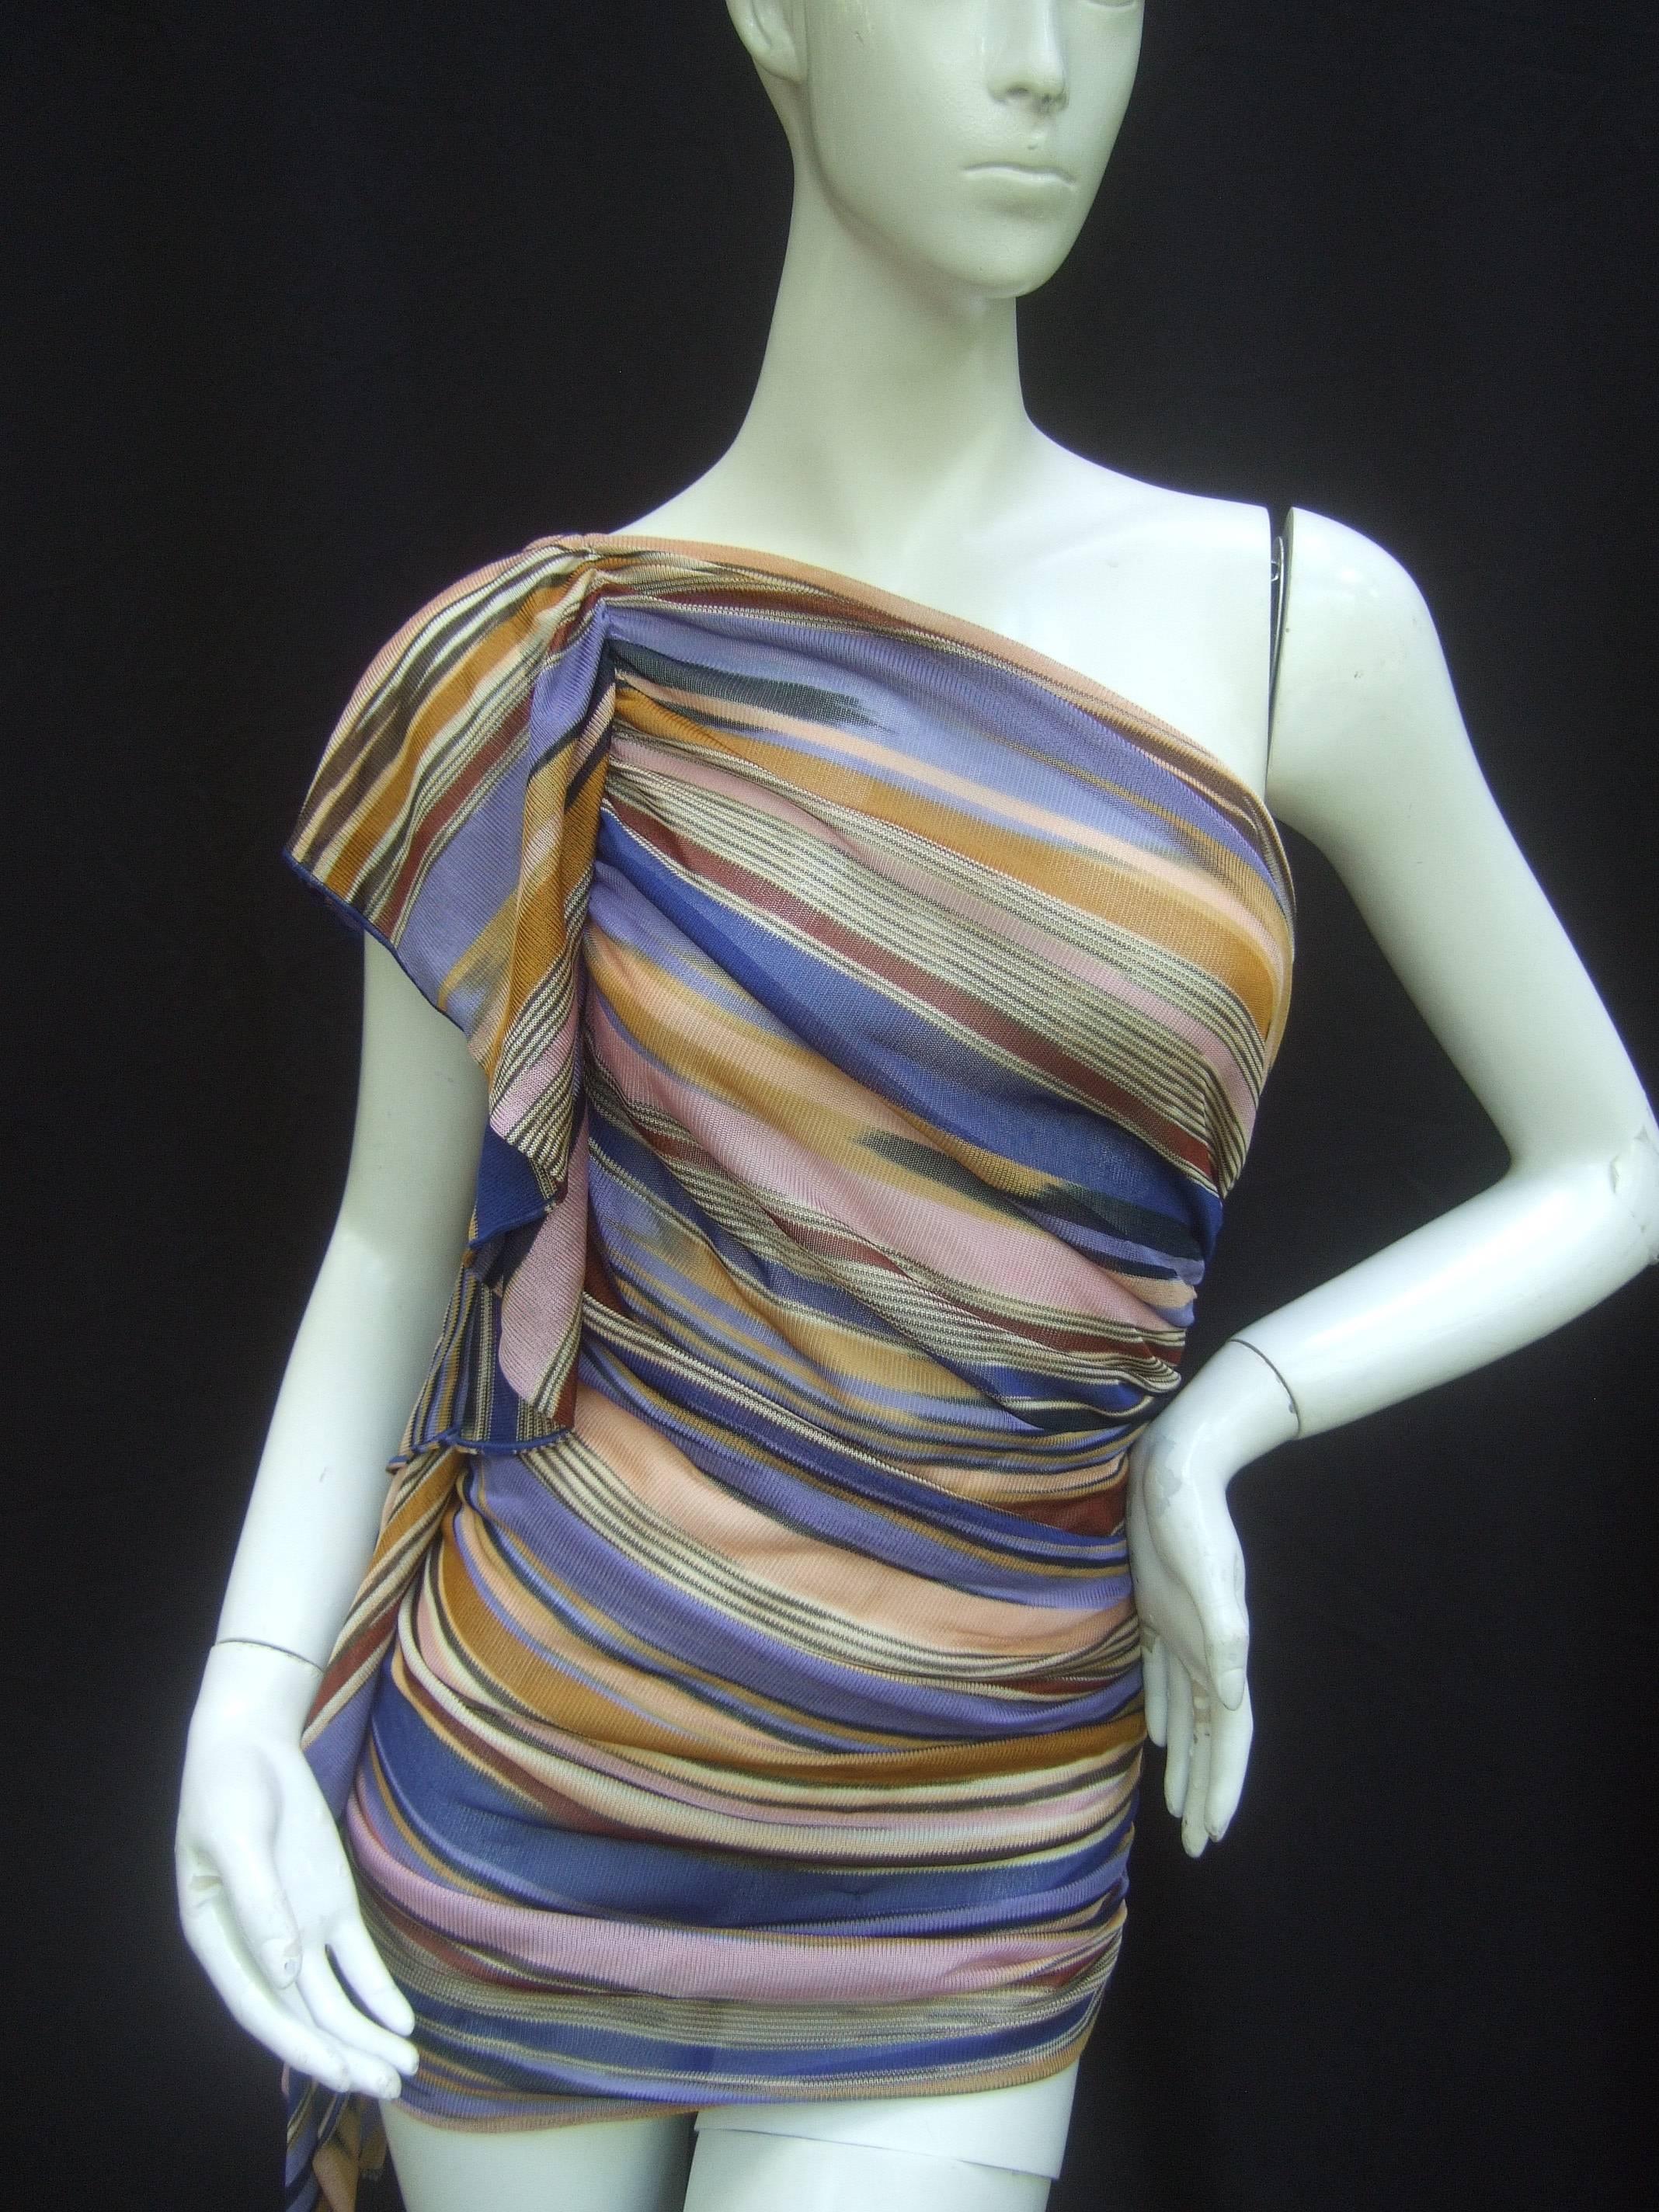 Missoni Italy horizontal striped knit one shoulder top 
The Italian knit top is designed with ruched draping
that gathers on one side. This creates subtle draped 
loose pleating that runs across the front and back sides

The gathered draping